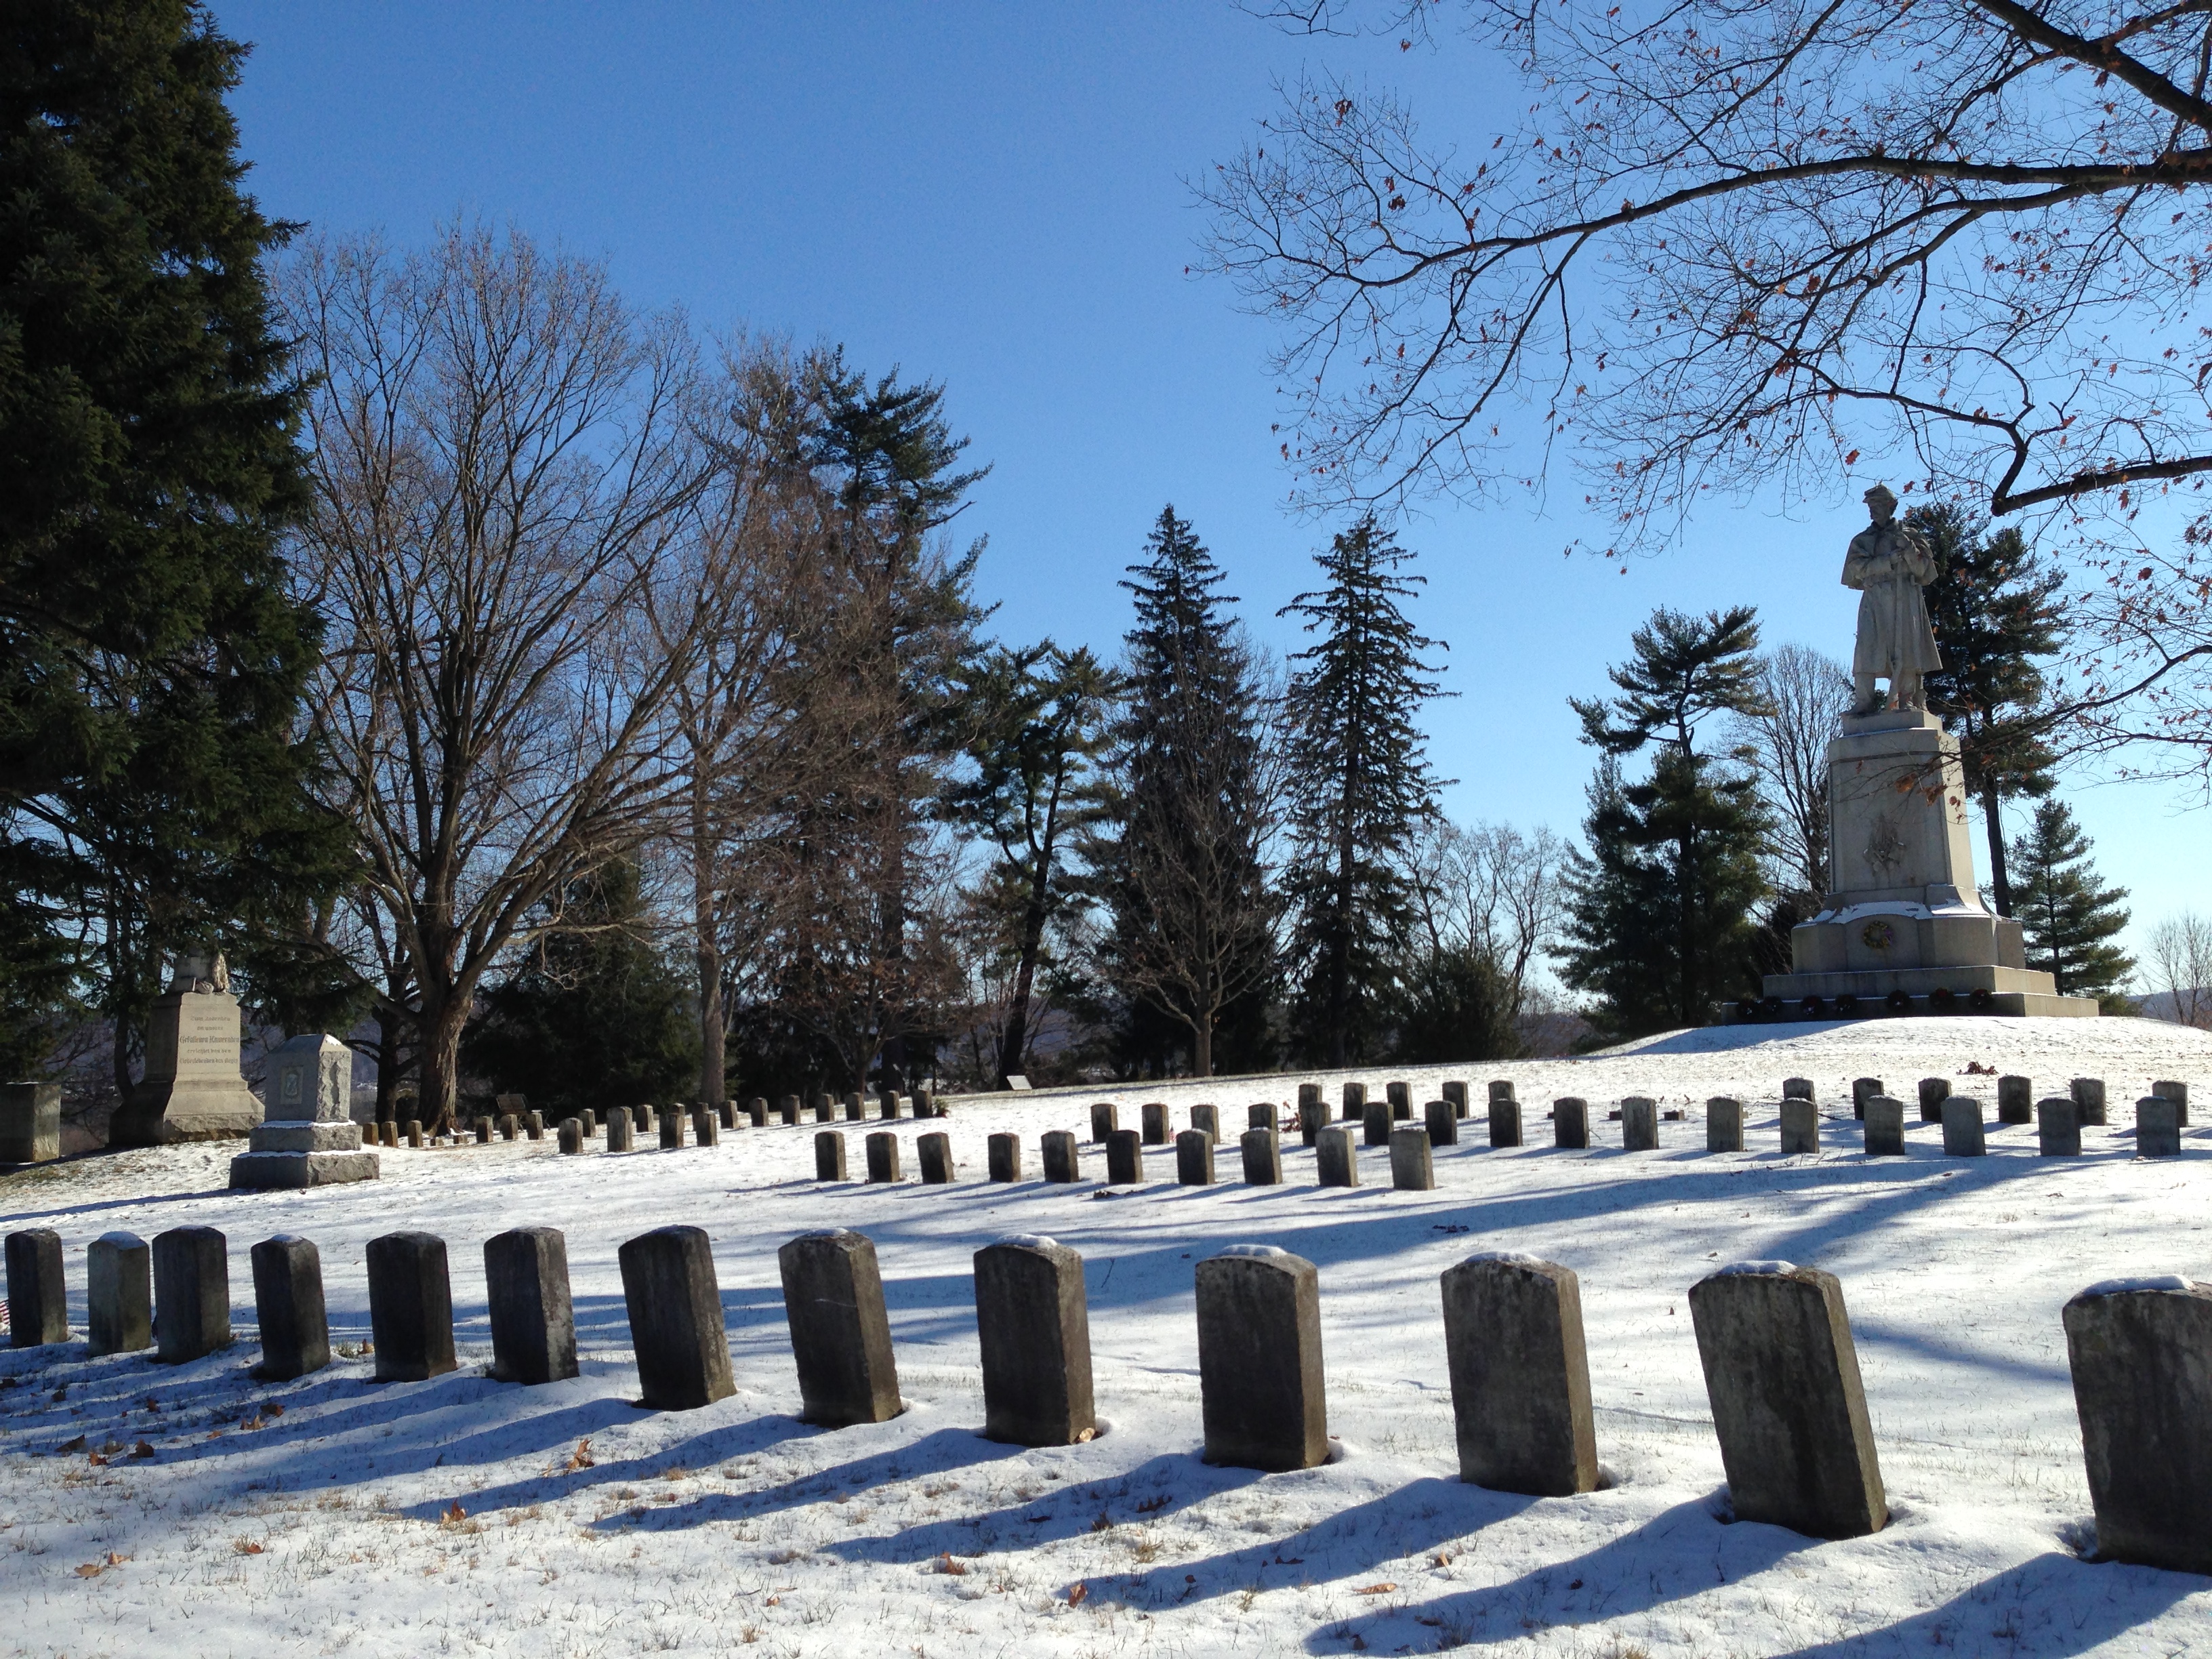 a monument of a soldier in the background with graves in front of the monument